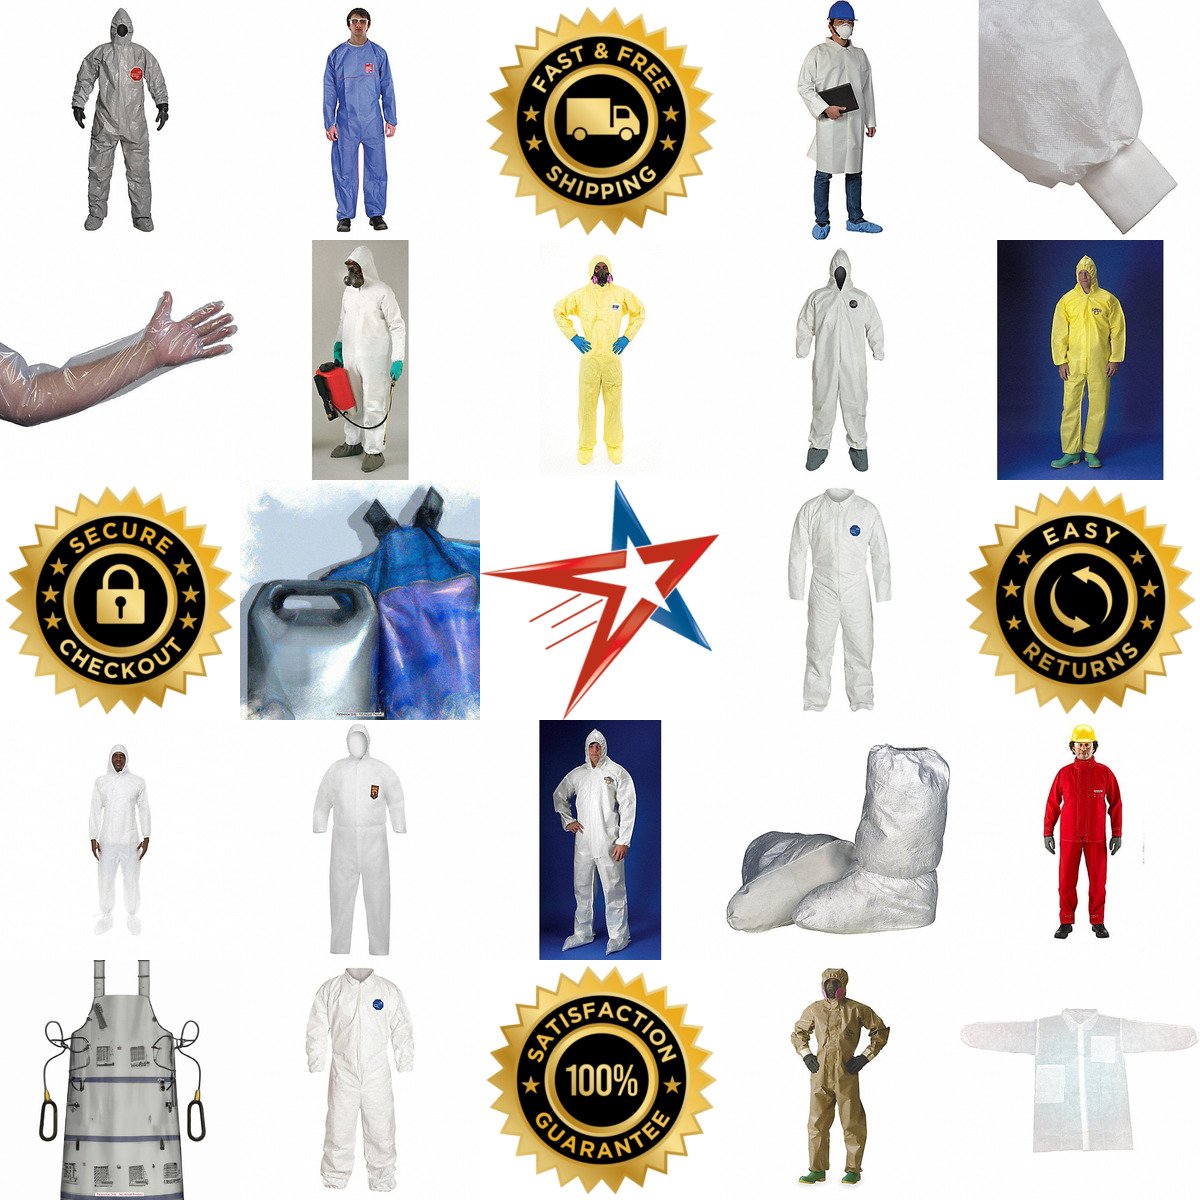 A selection of Chemical and Particulate Protective Clothing products on GoVets